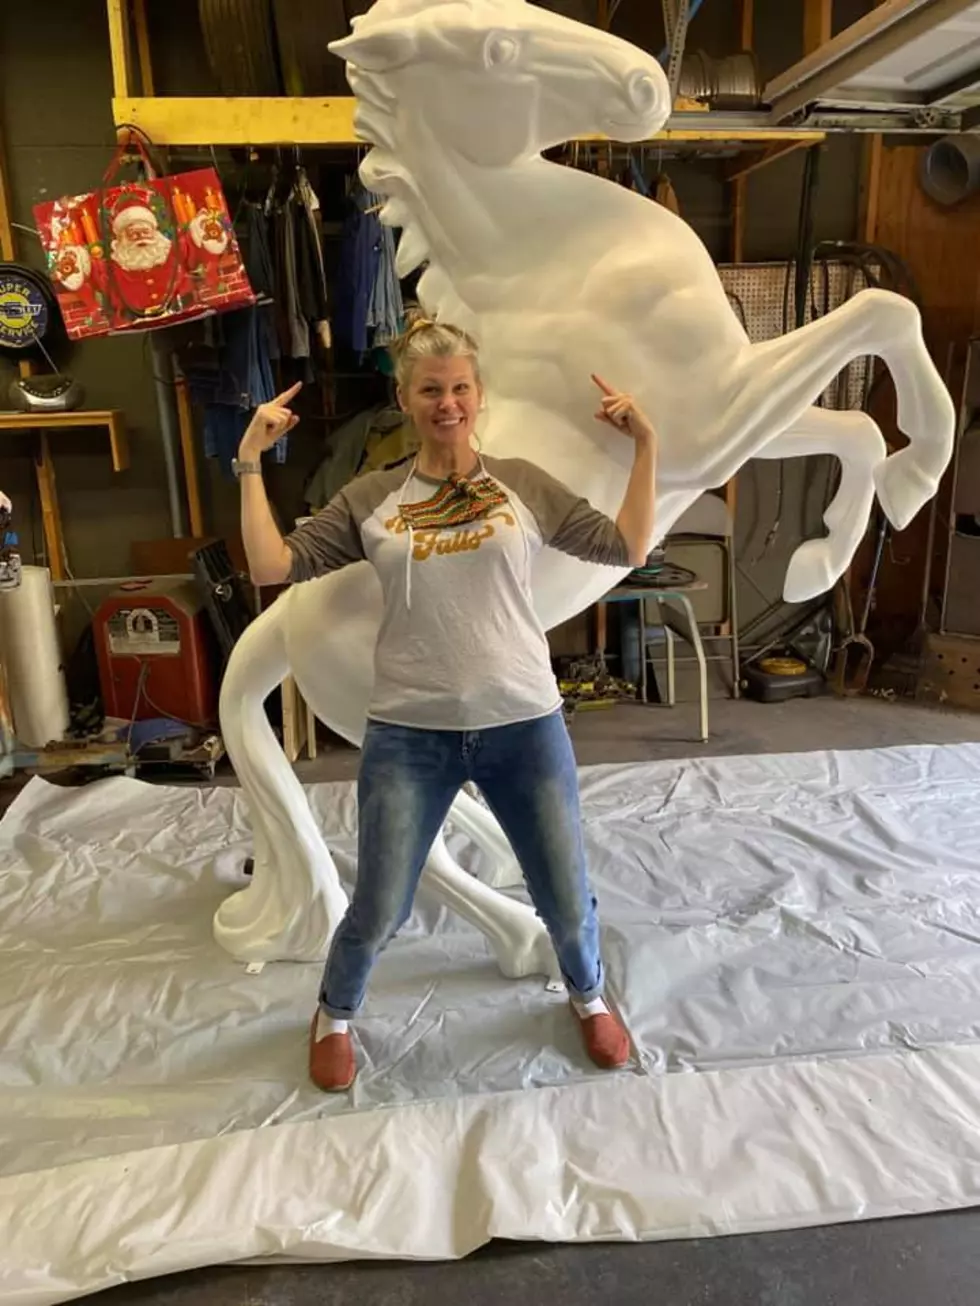 Watch One of the Wichita Falls Mustangs Get Painted in Awesome Time Lapse Video